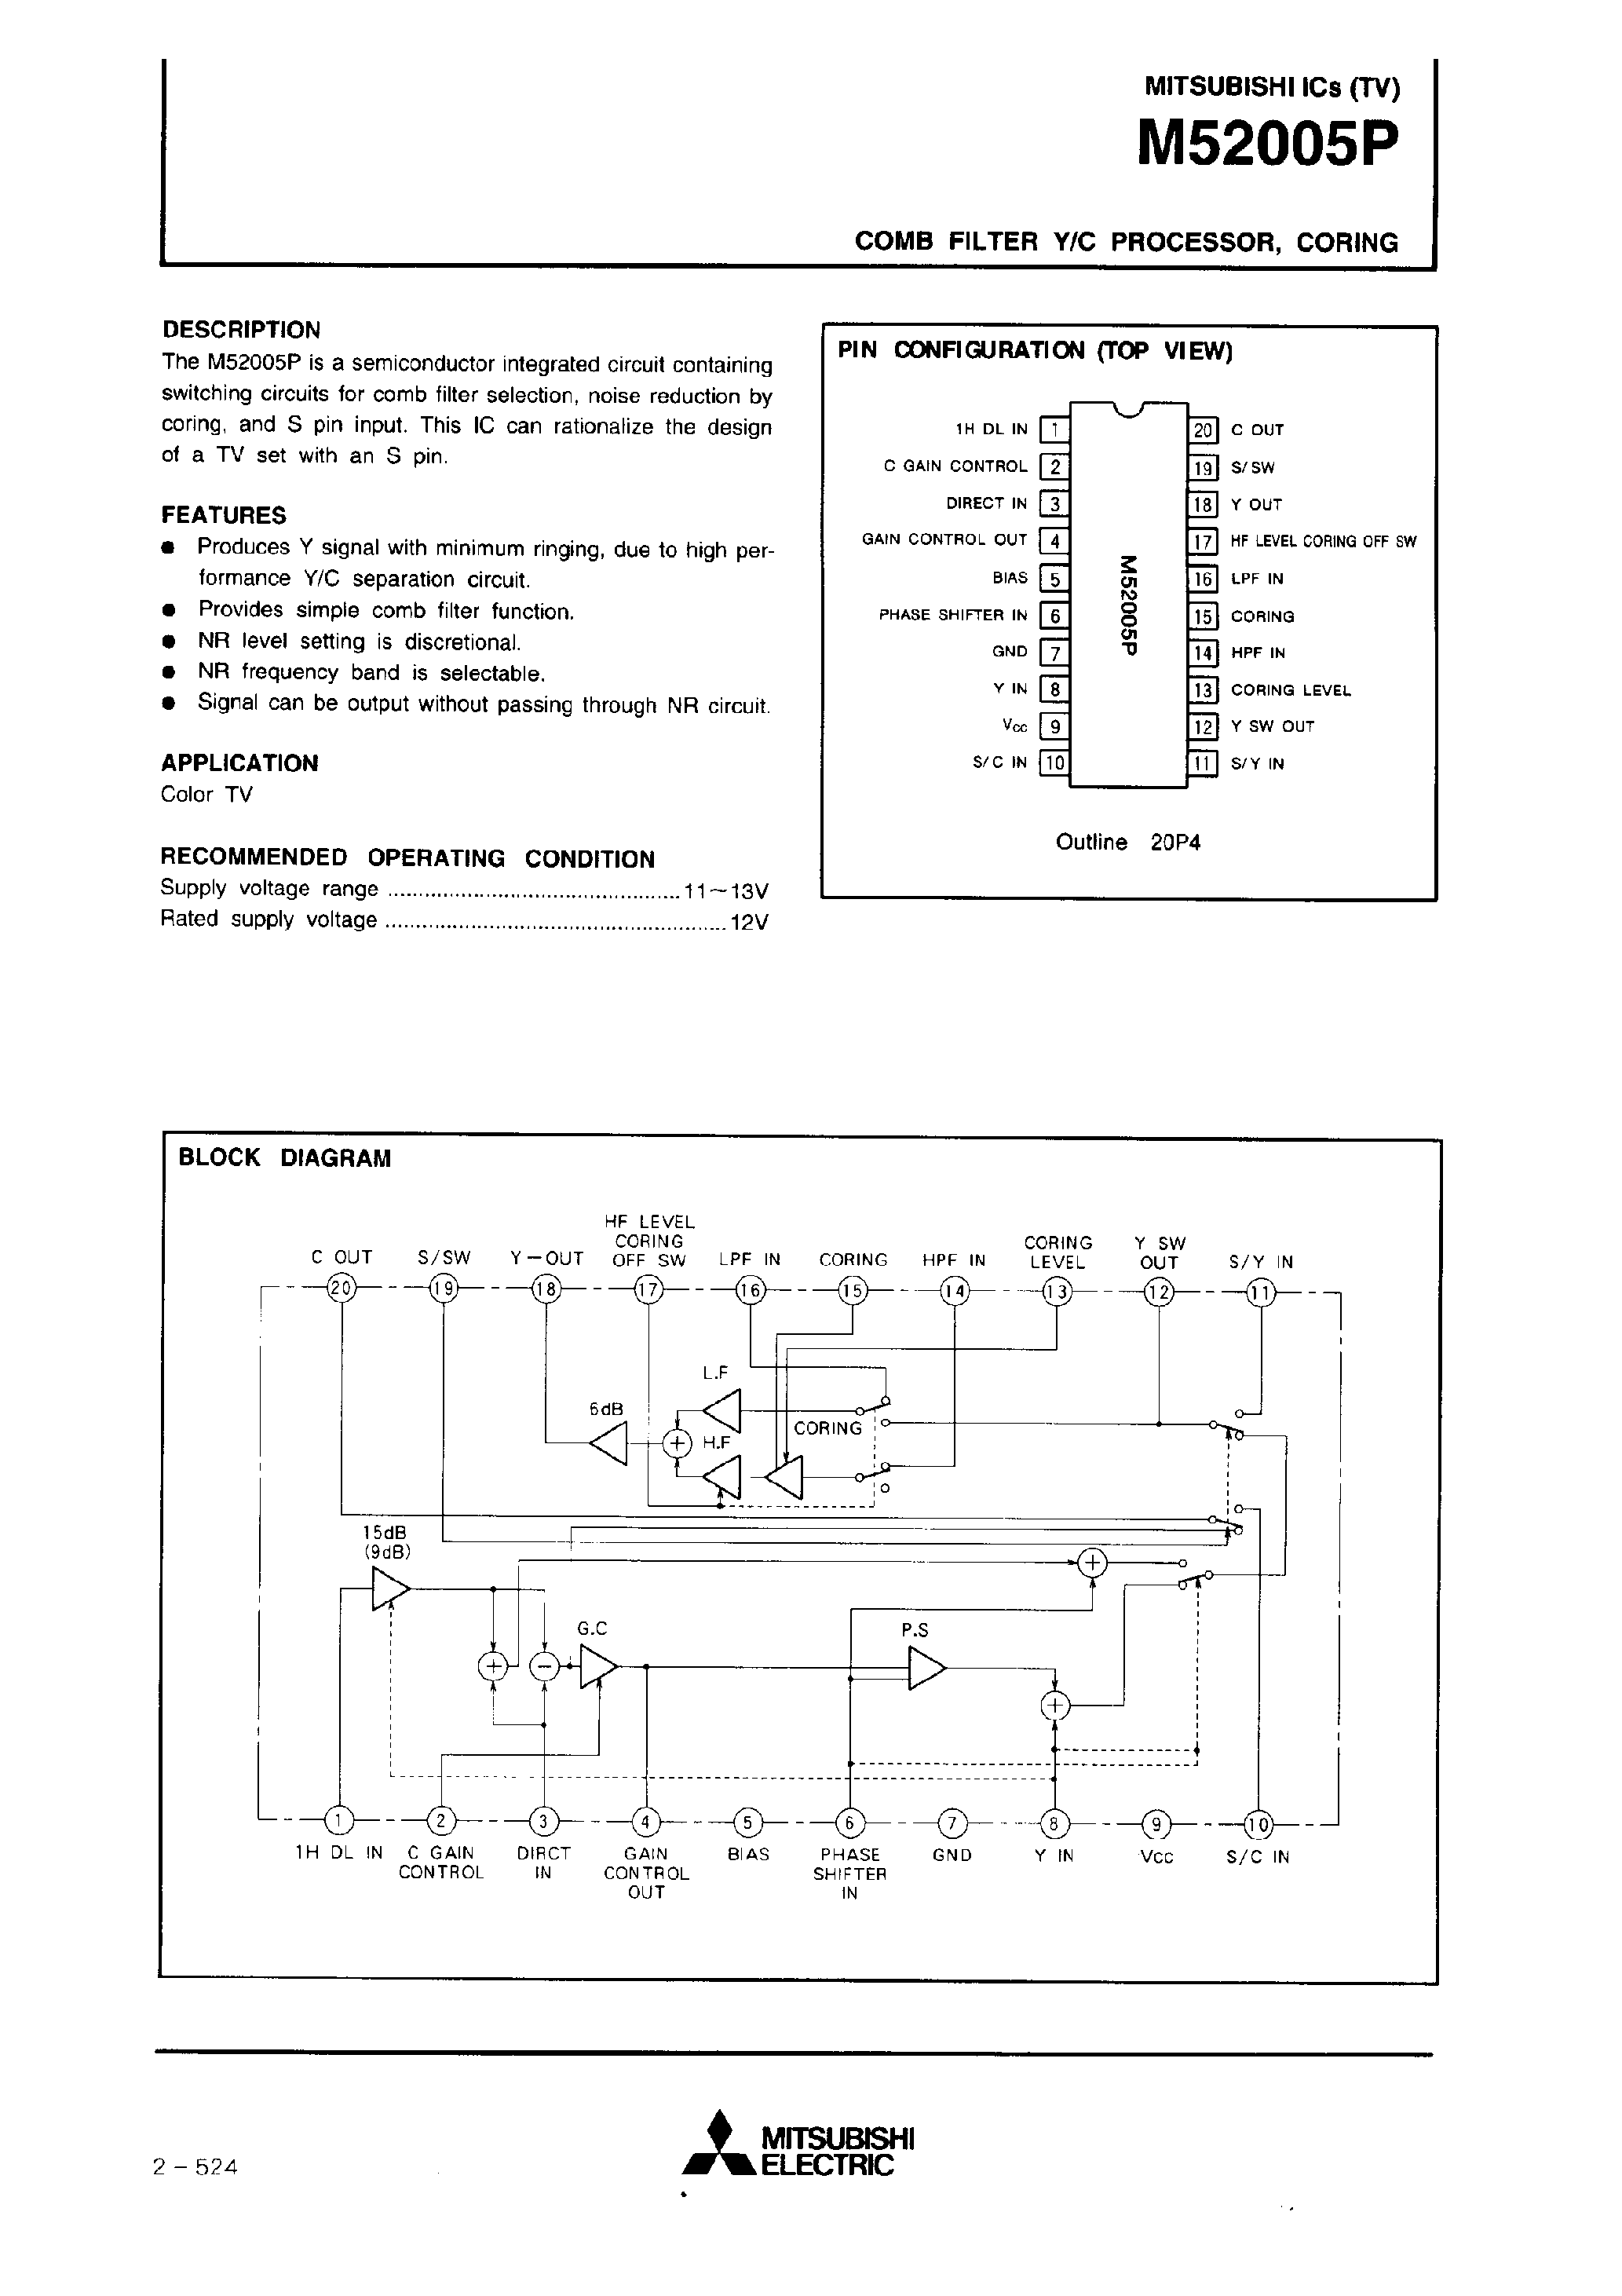 Datasheet M52005P - COMB FILTER Y/C PROCESSOR/CORING page 1